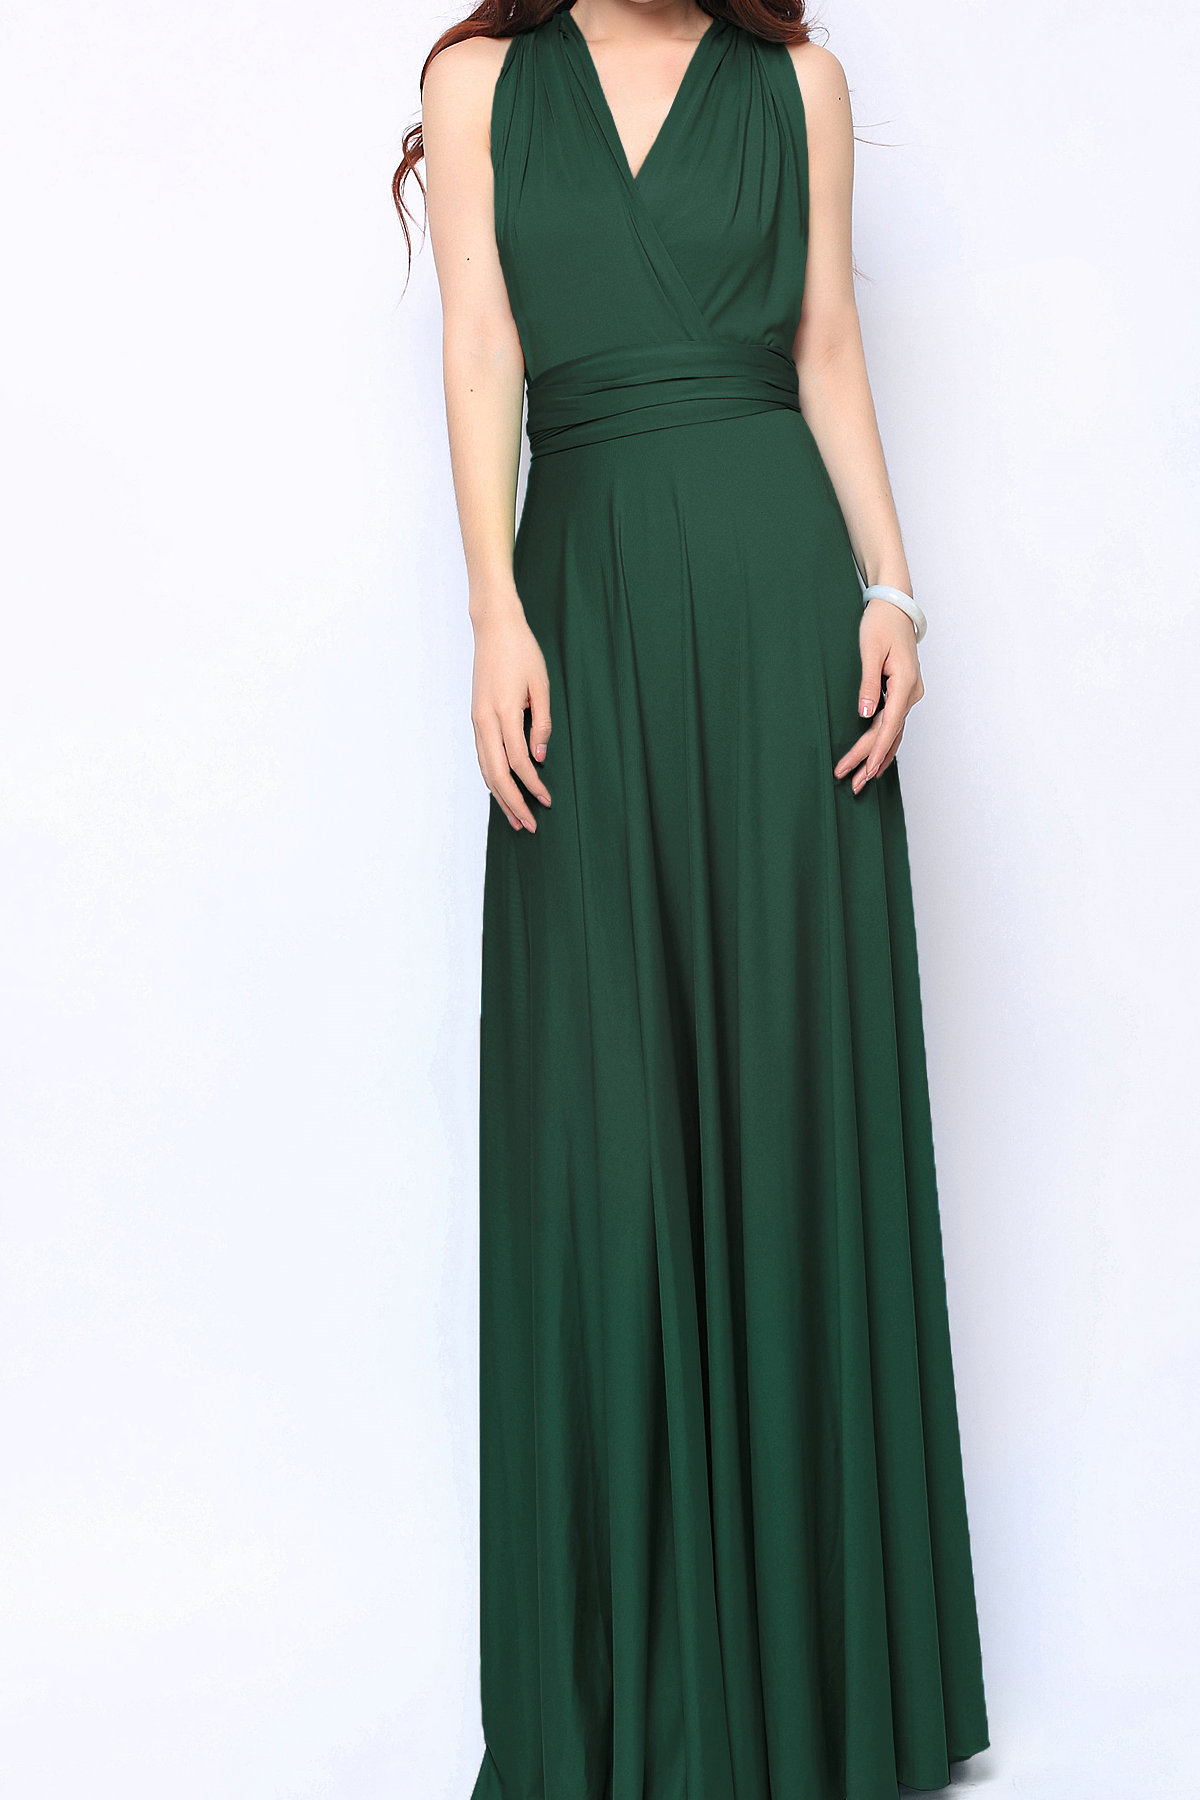 forest green plus size dress